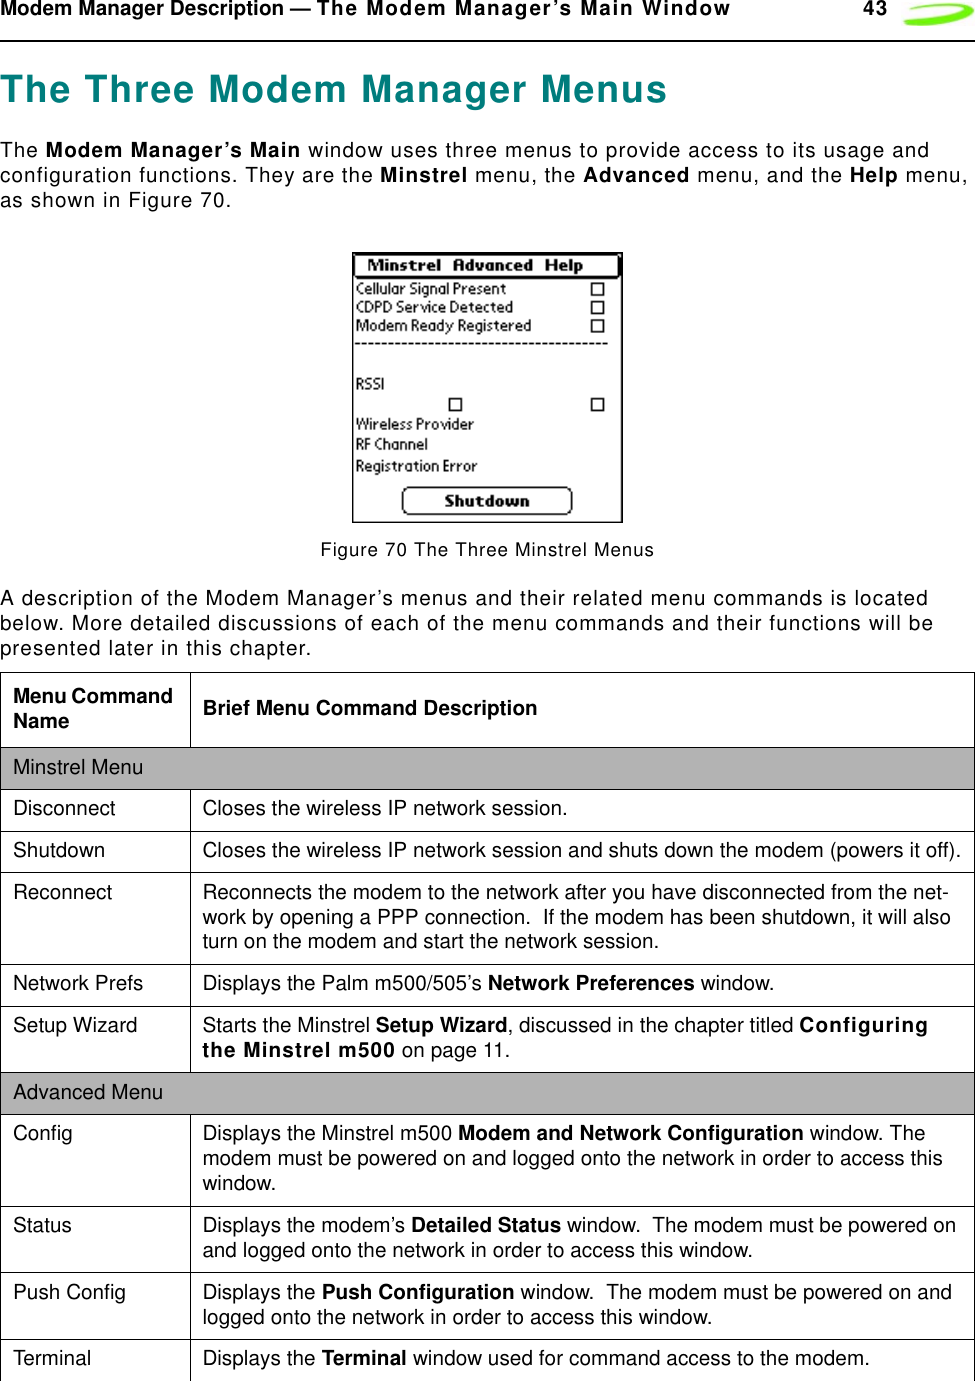 Modem Manager Description — The Modem Manager’s Main Window 43The Three Modem Manager MenusThe Modem Manager’s Main window uses three menus to provide access to its usage and configuration functions. They are the Minstrel menu, the Advanced menu, and the Help menu, as shown in Figure 70.Figure 70 The Three Minstrel MenusA description of the Modem Manager’s menus and their related menu commands is located below. More detailed discussions of each of the menu commands and their functions will be presented later in this chapter.Menu Command Name Brief Menu Command DescriptionMinstrel MenuDisconnect Closes the wireless IP network session.Shutdown Closes the wireless IP network session and shuts down the modem (powers it off).Reconnect Reconnects the modem to the network after you have disconnected from the net-work by opening a PPP connection.  If the modem has been shutdown, it will also turn on the modem and start the network session.Network Prefs Displays the Palm m500/505’s Network Preferences window.Setup Wizard Starts the Minstrel Setup Wizard, discussed in the chapter titled Configuring the Minstrel m500 on page 11.Advanced MenuConfig Displays the Minstrel m500 Modem and Network Configuration window. The modem must be powered on and logged onto the network in order to access this window.Status Displays the modem’s Detailed Status window.  The modem must be powered on and logged onto the network in order to access this window.Push Config Displays the Push Configuration window.  The modem must be powered on and logged onto the network in order to access this window.Terminal Displays the Terminal window used for command access to the modem.